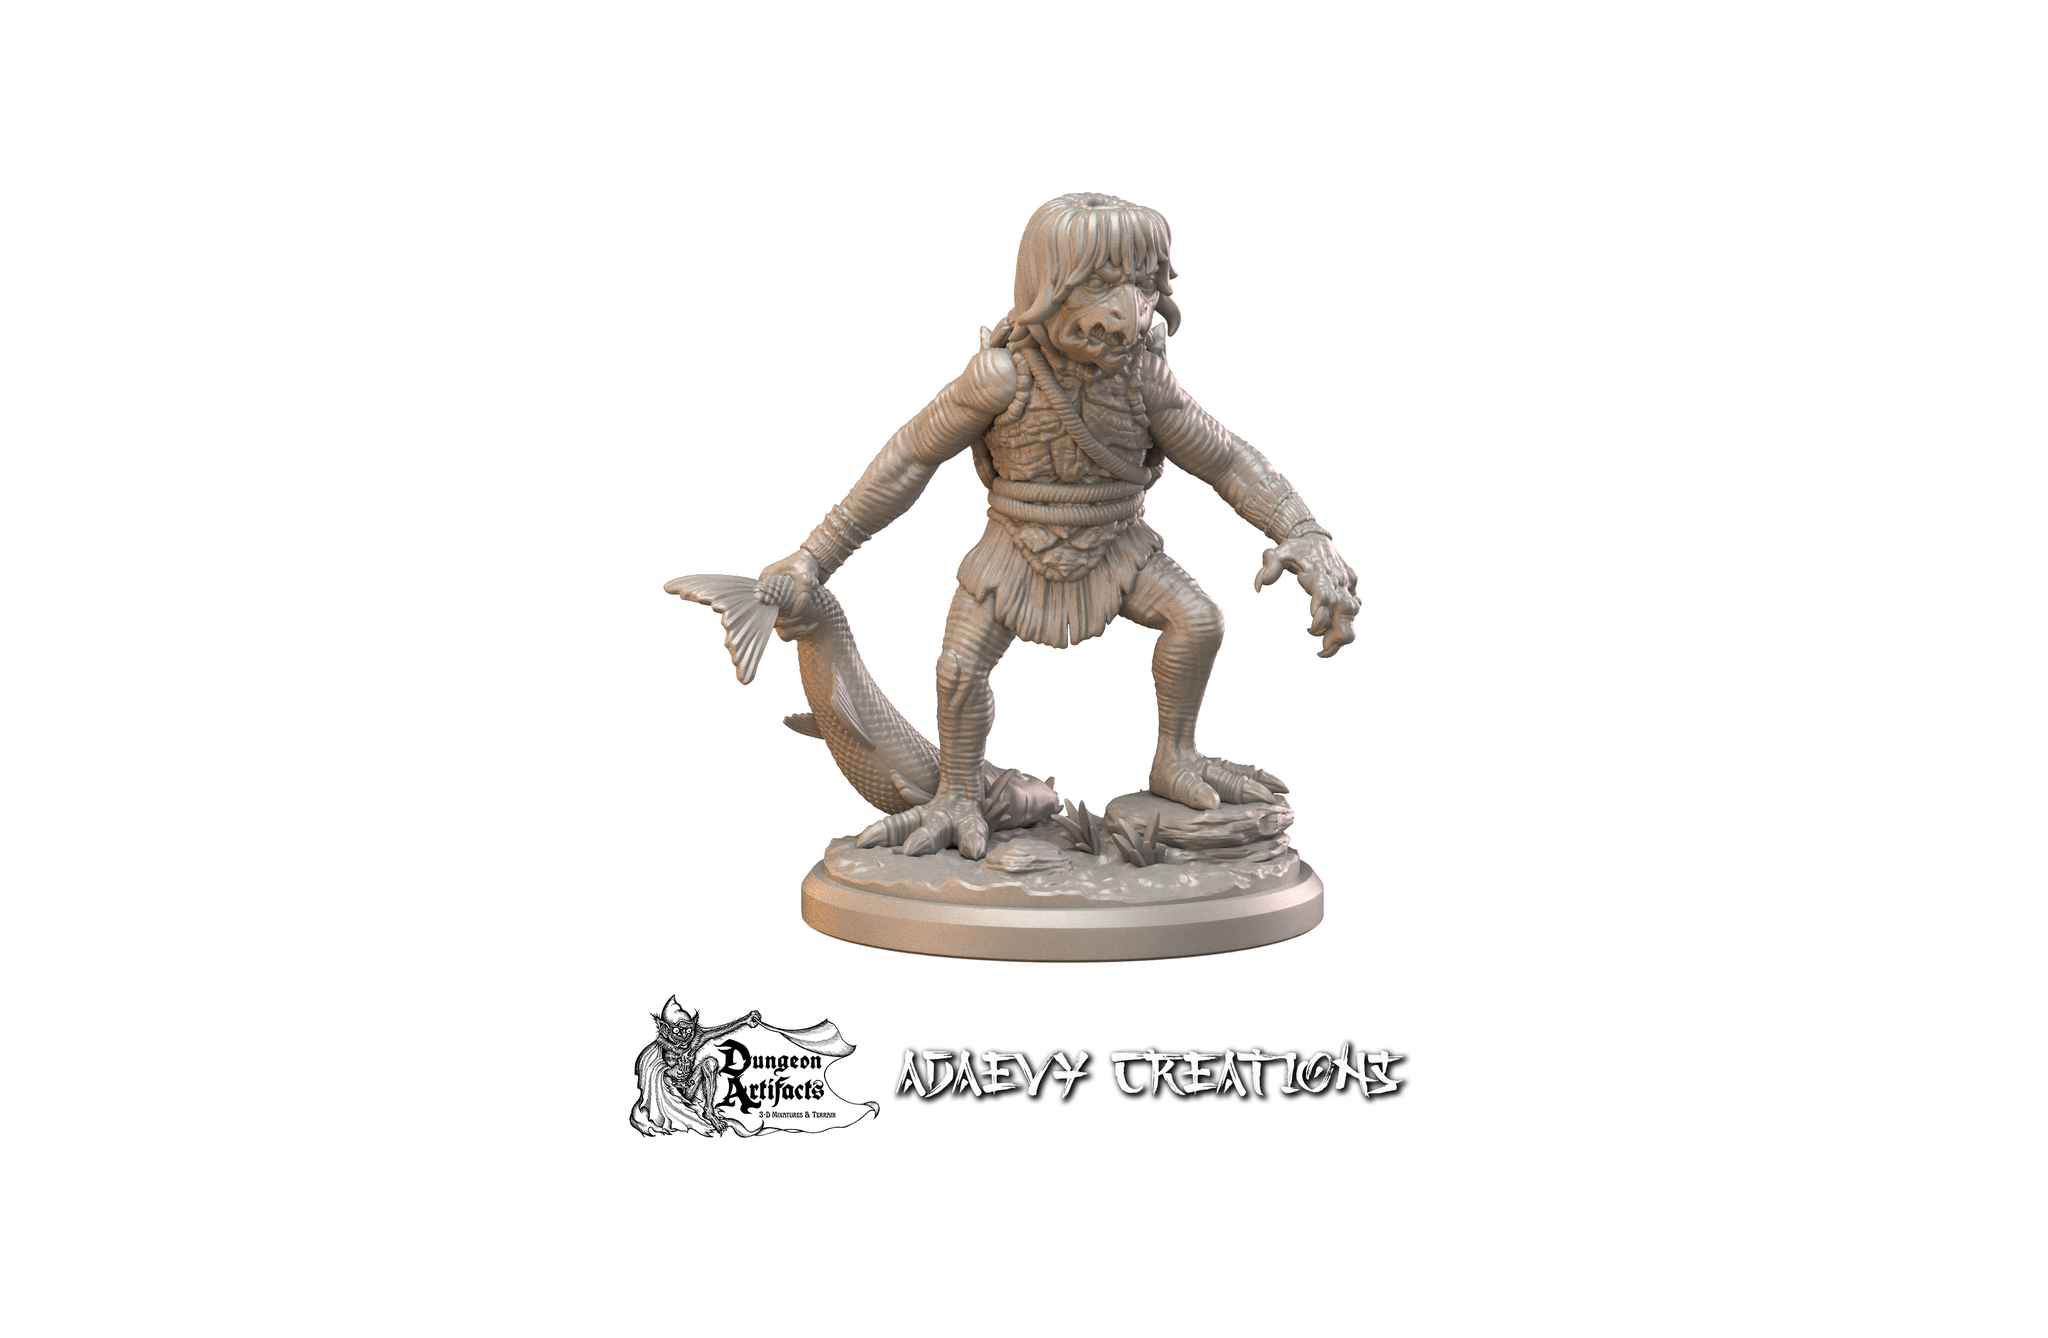 Kappa - The Encounter - Adaevy Creations Wargaming D&D DnD – Dungeon Artifacts